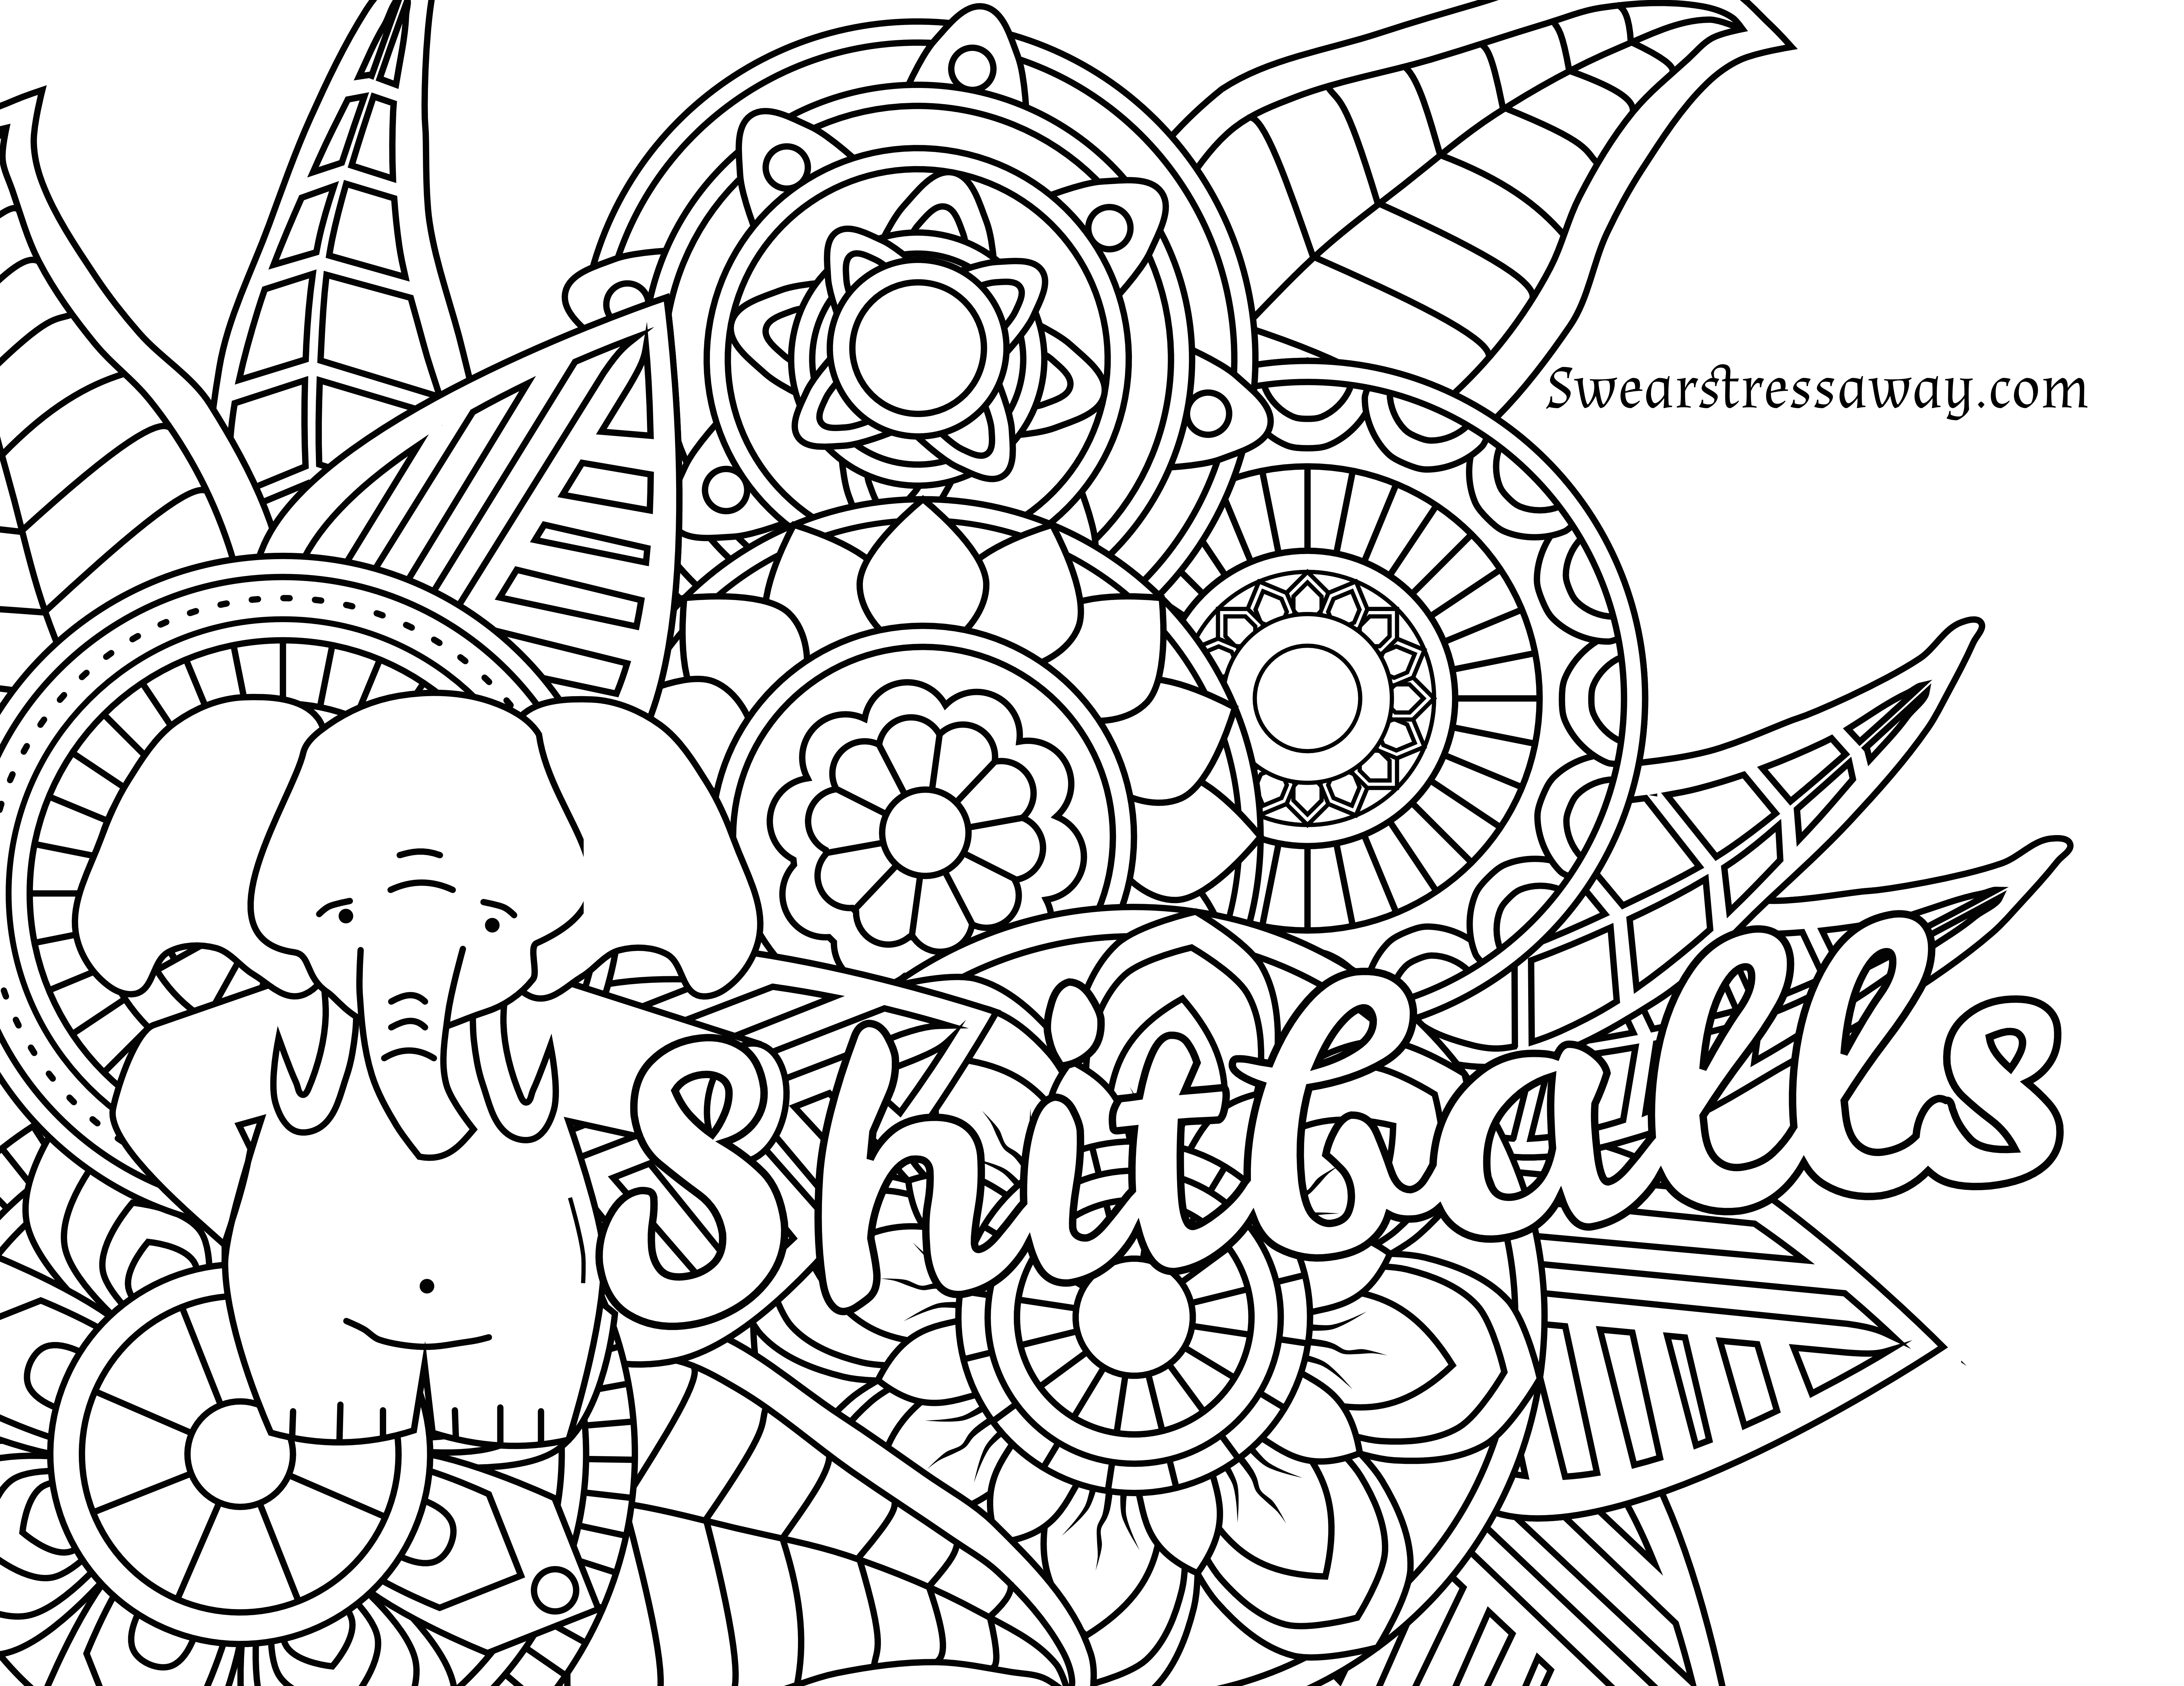 Free Printable Coloring Page - Shitballs - Swear Word Coloring Page - Free Printable Coloring Pages For Adults Swear Words